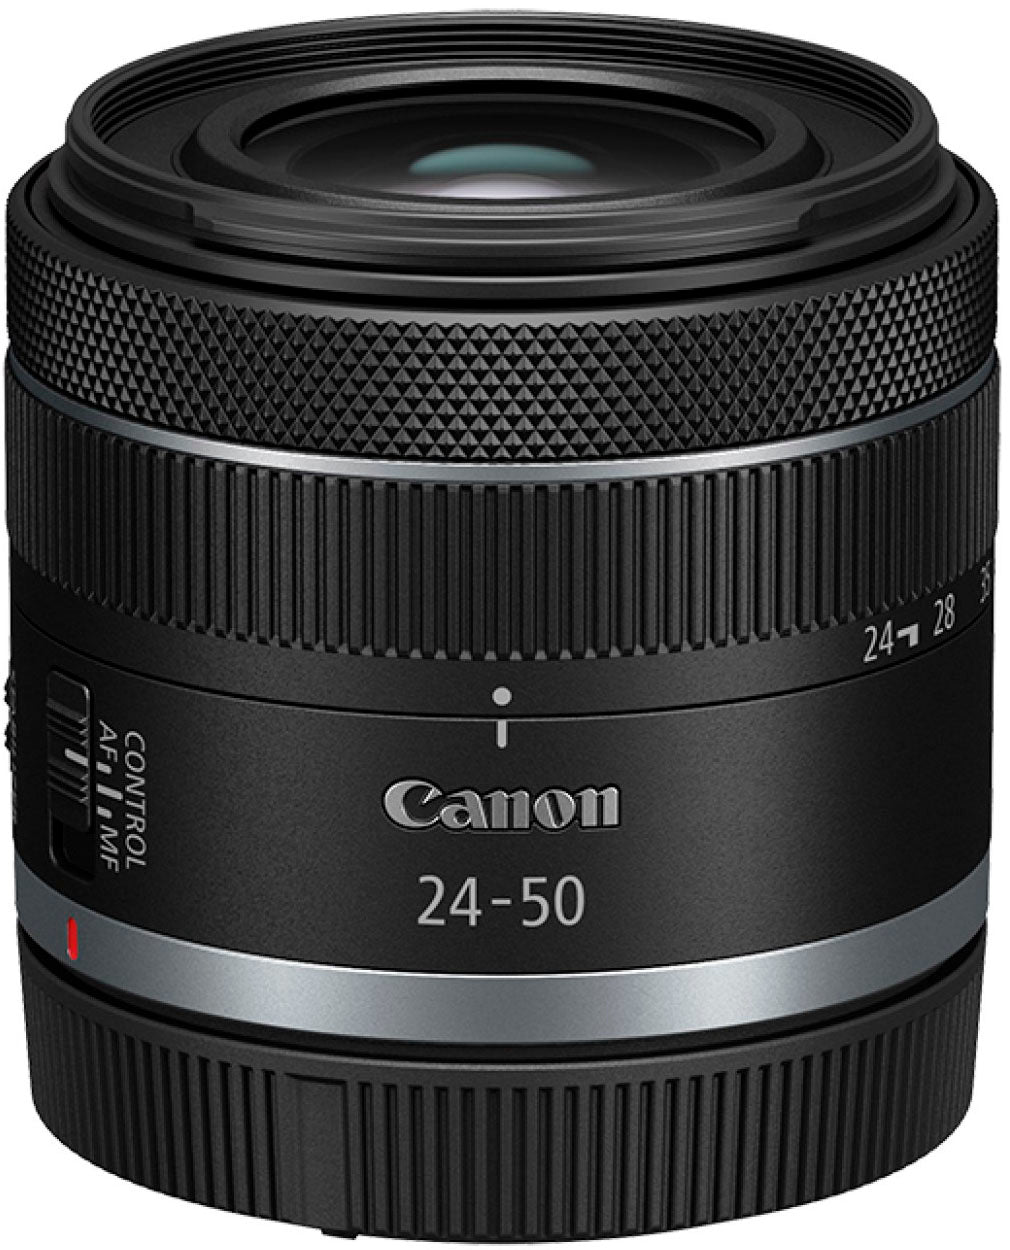 RF 24-50mm f/4.5-6.3 IS STM Wide Angle Zoom Lens for Canon RF Mount Cameras - Black_7